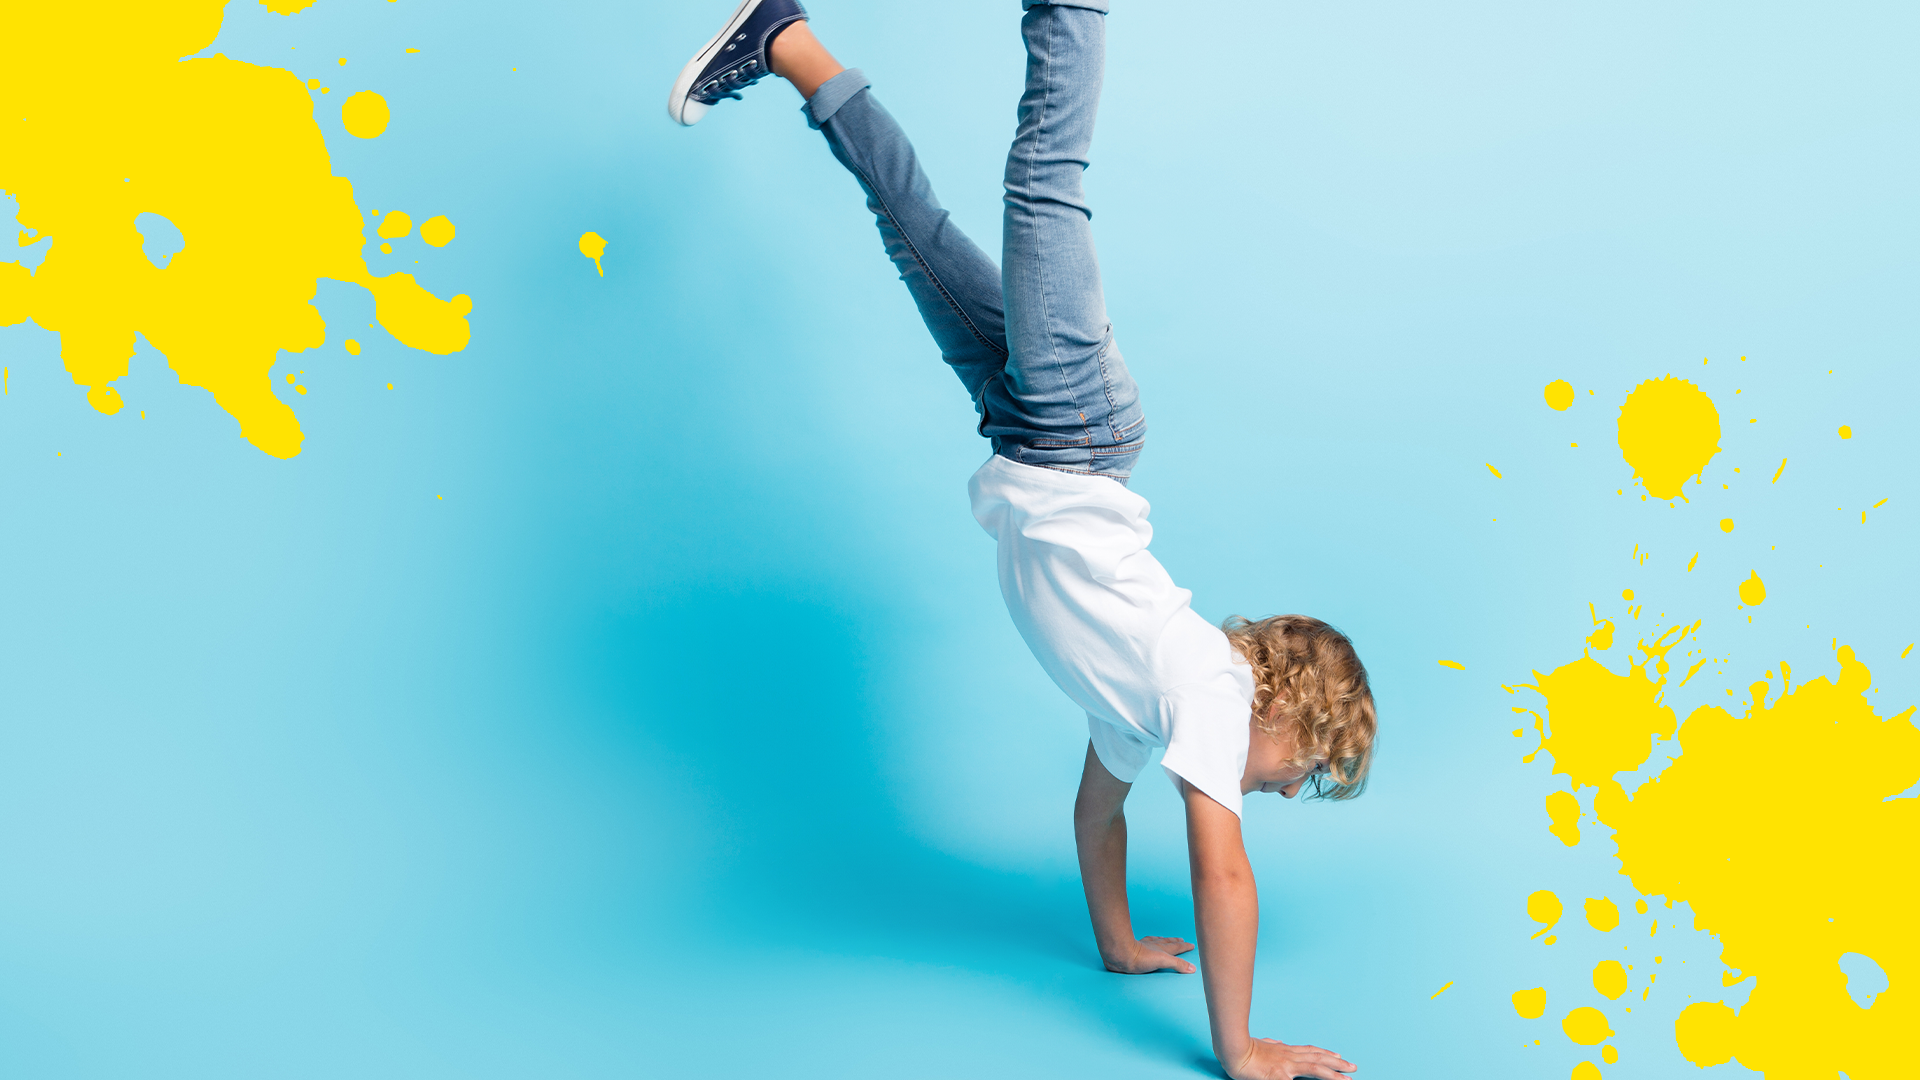 Boy doing a handstand with splats